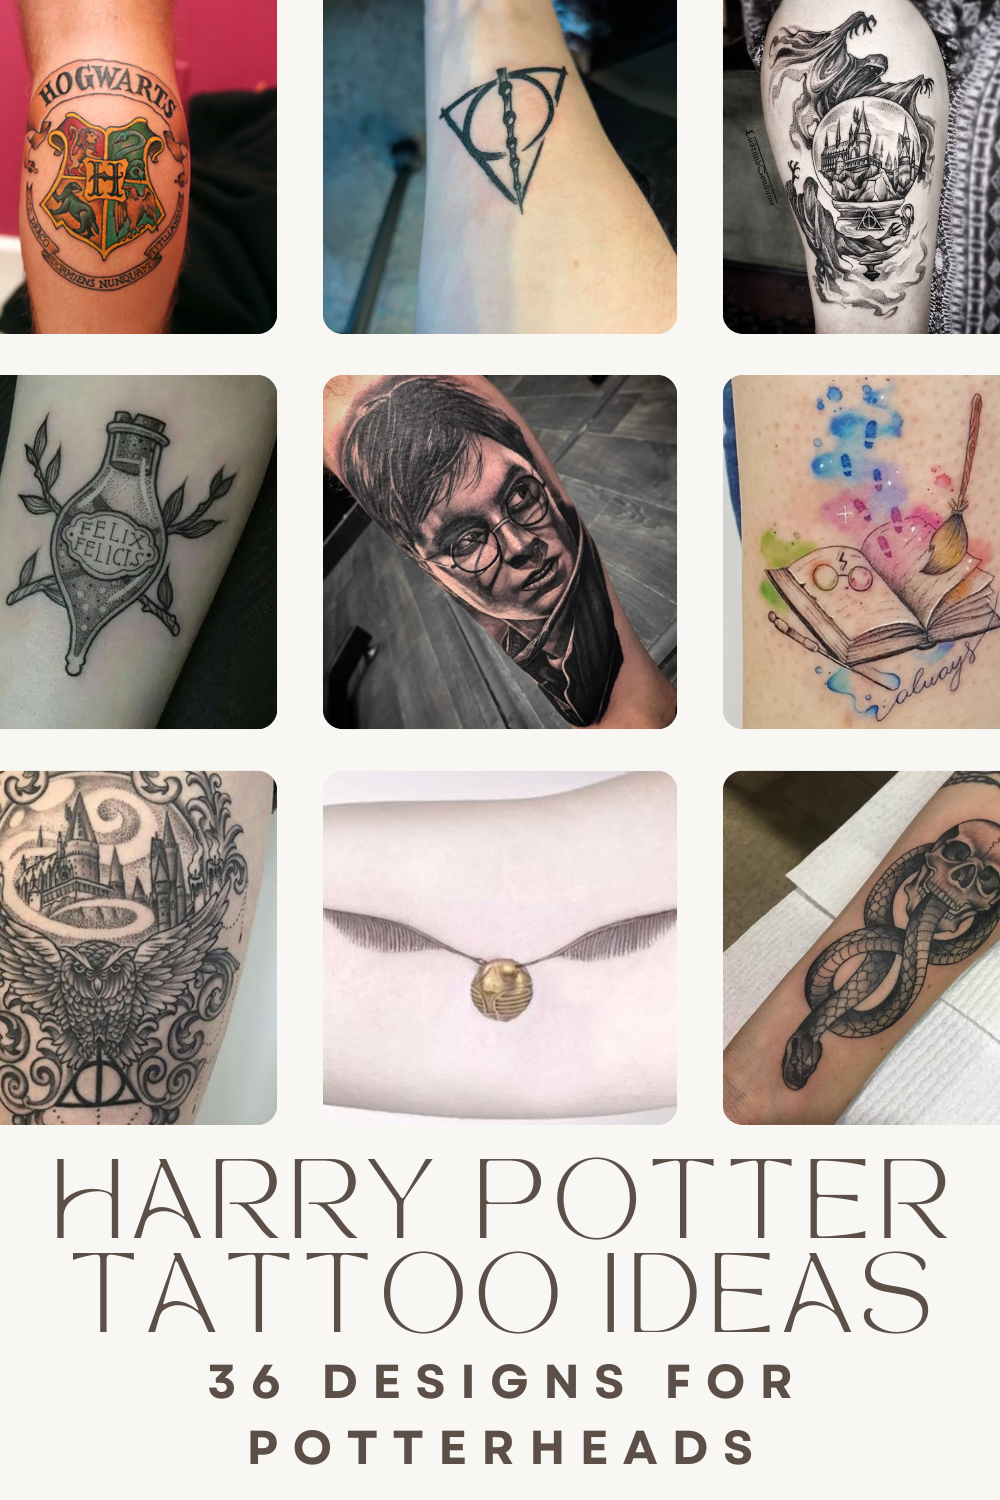 37 Harry Potter Tattoo Ideas with Meanings - Choose Yours Favorite, Potterheads Top Beauty Magazines